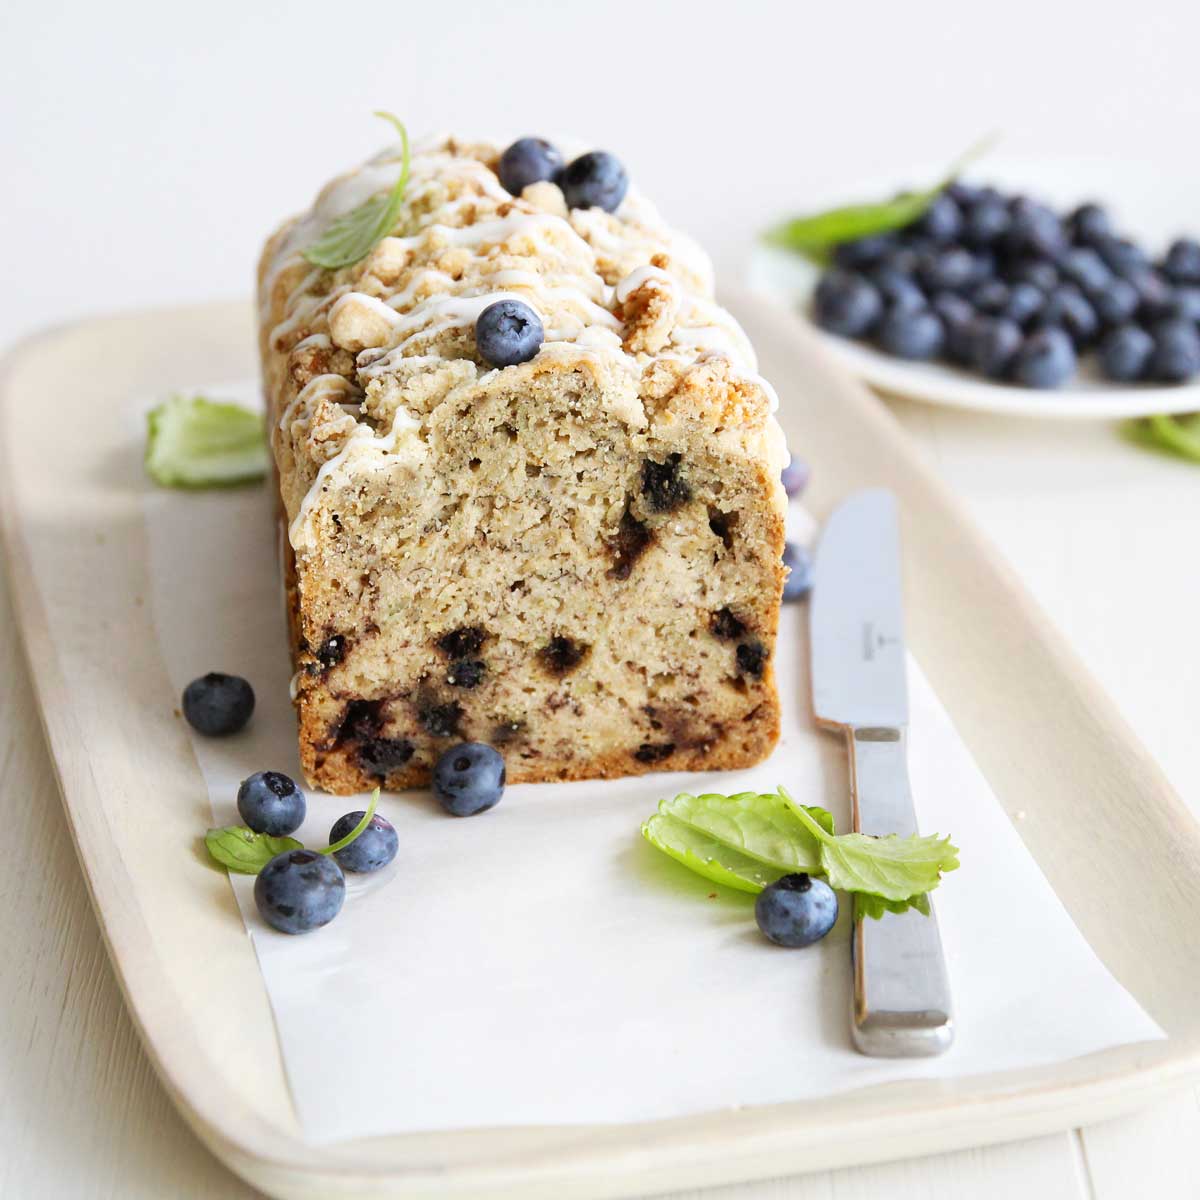 Blueberry Banana Bread with Oats & Streusel (Eggless, Dairy Free)